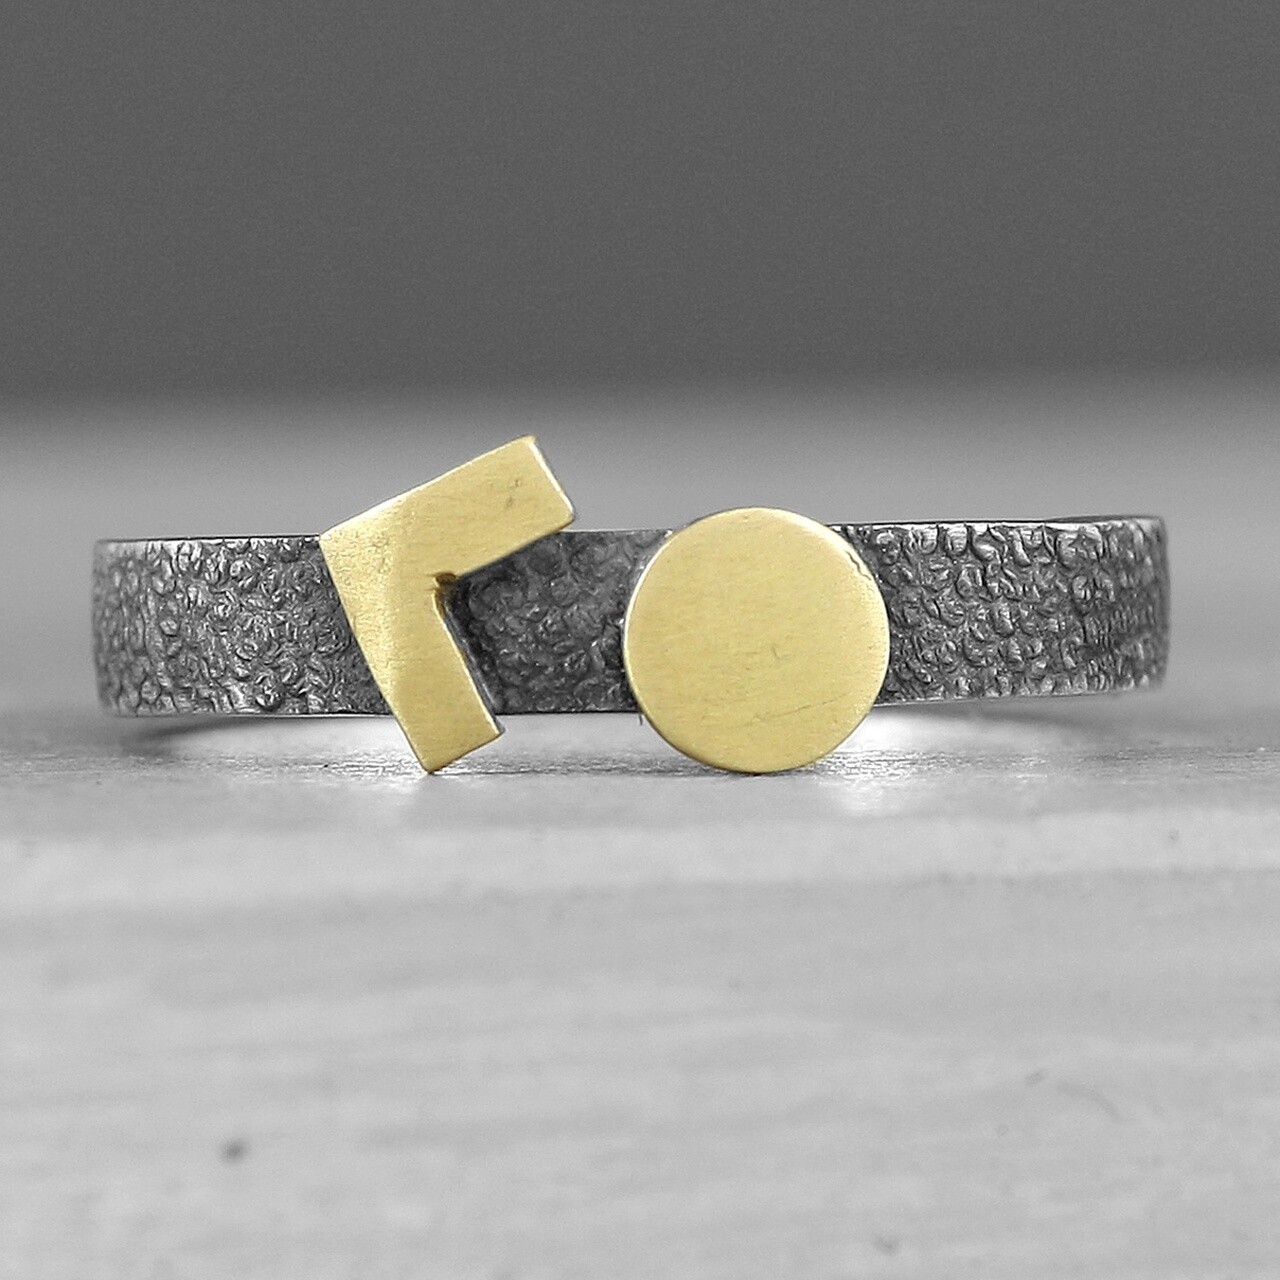 Shapes Silver And 18ct Gold Ring - Oxidised - 3mm By Mark Veevers